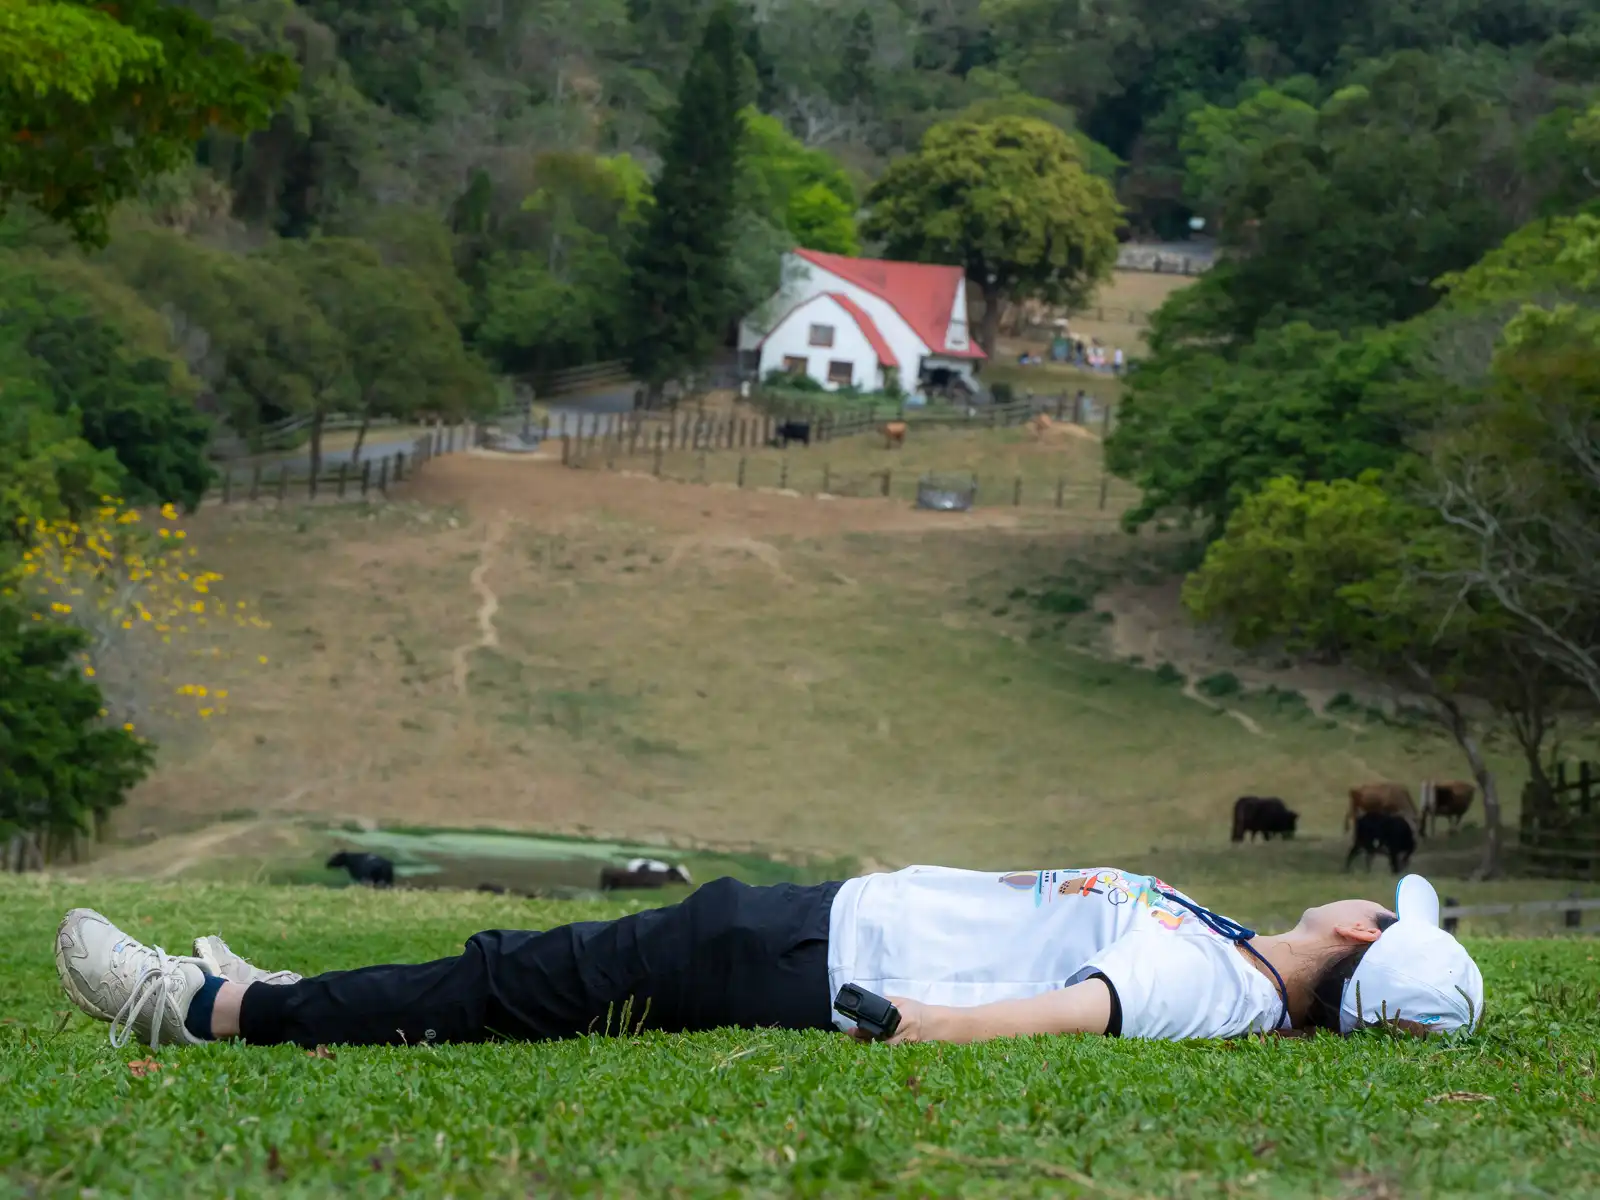 A tourist is lying down on a large grassy field.